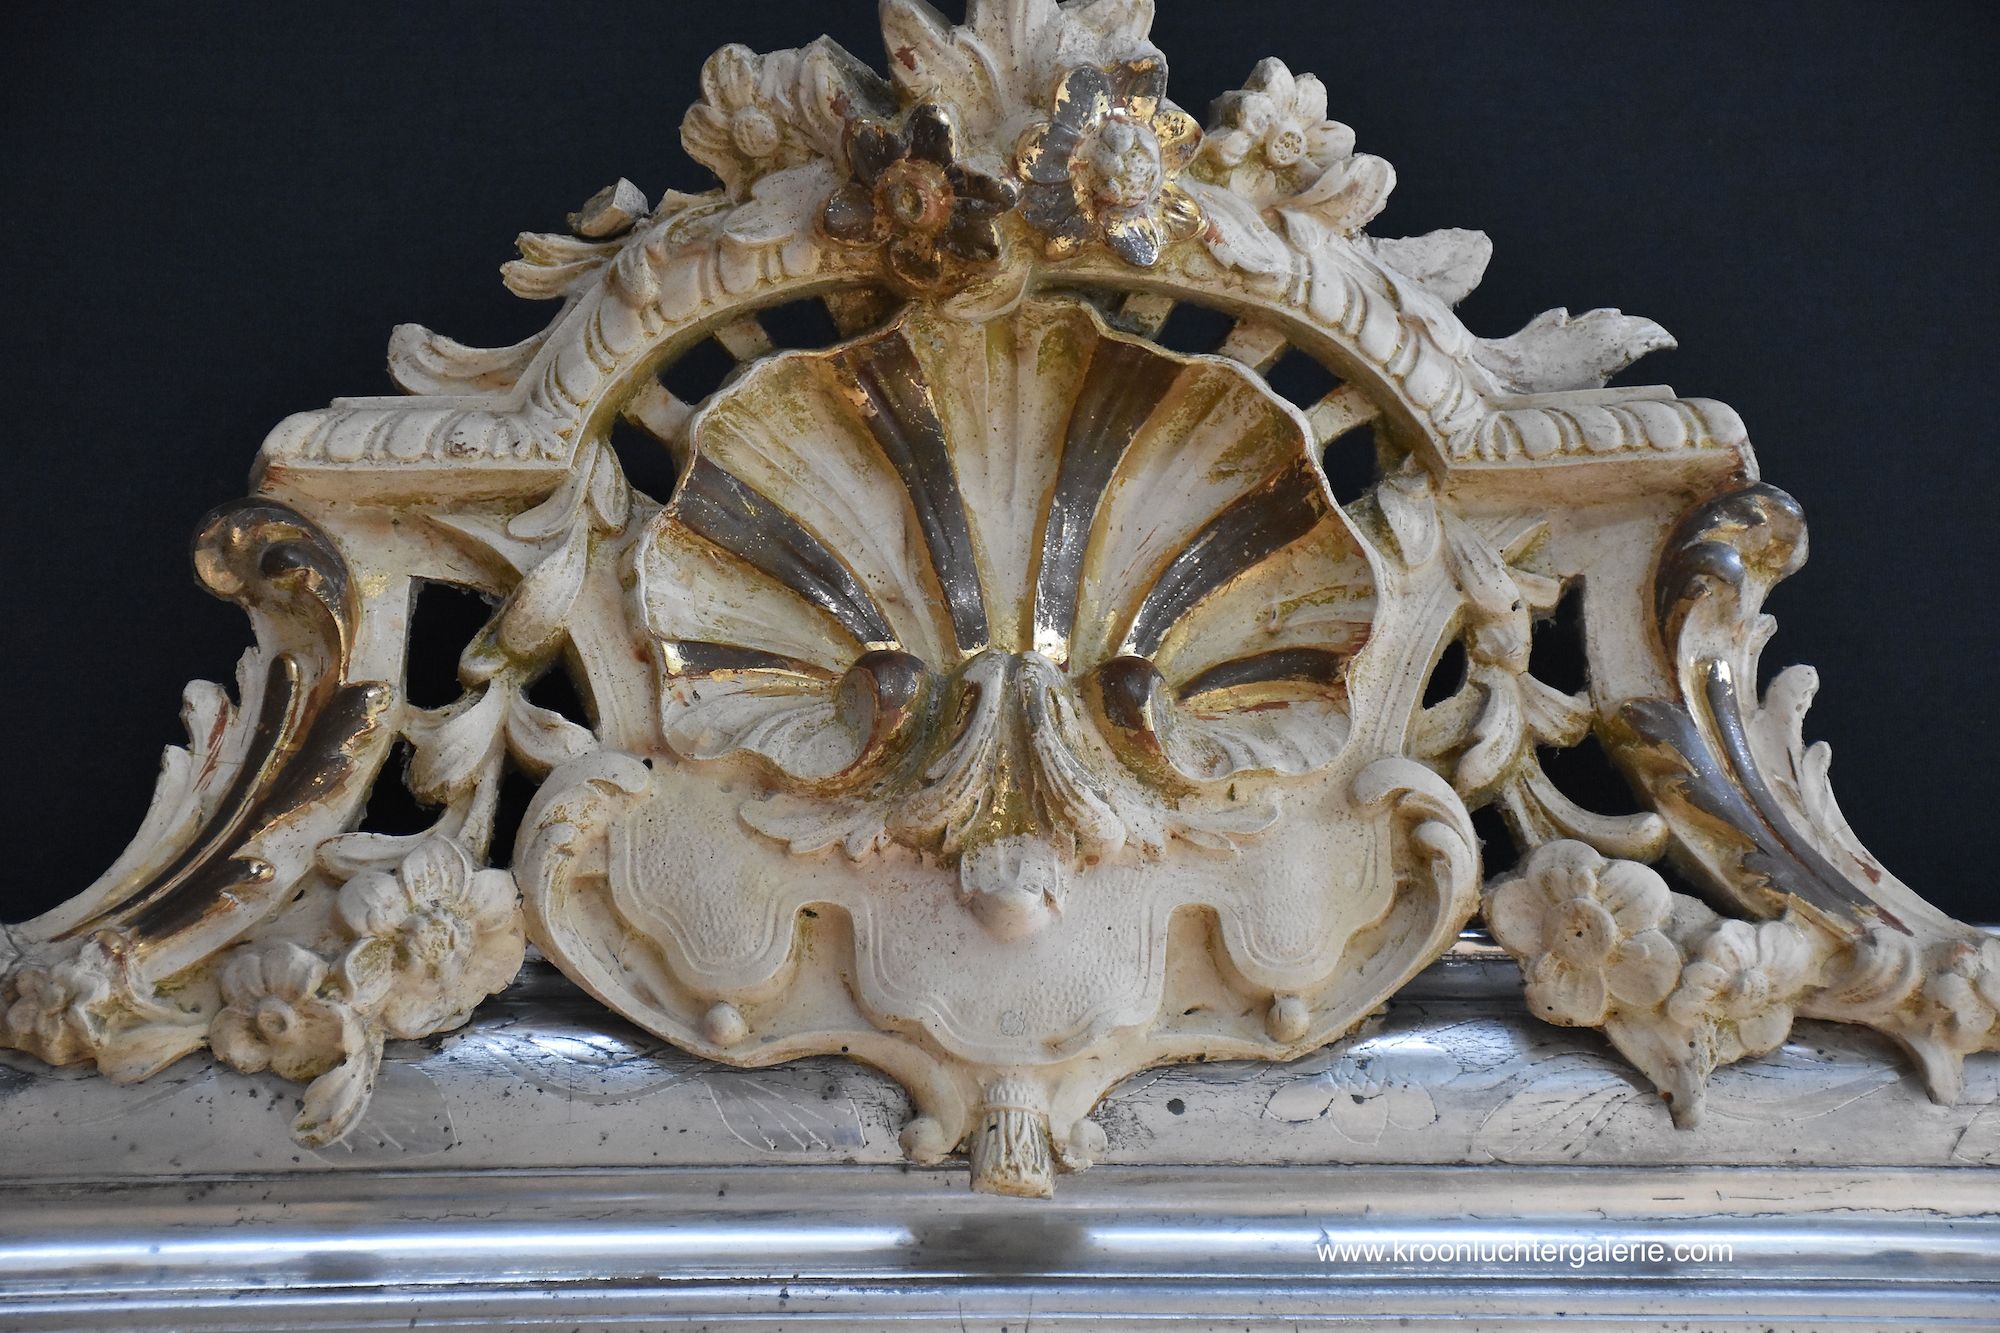 Large antique French mirror with a crest